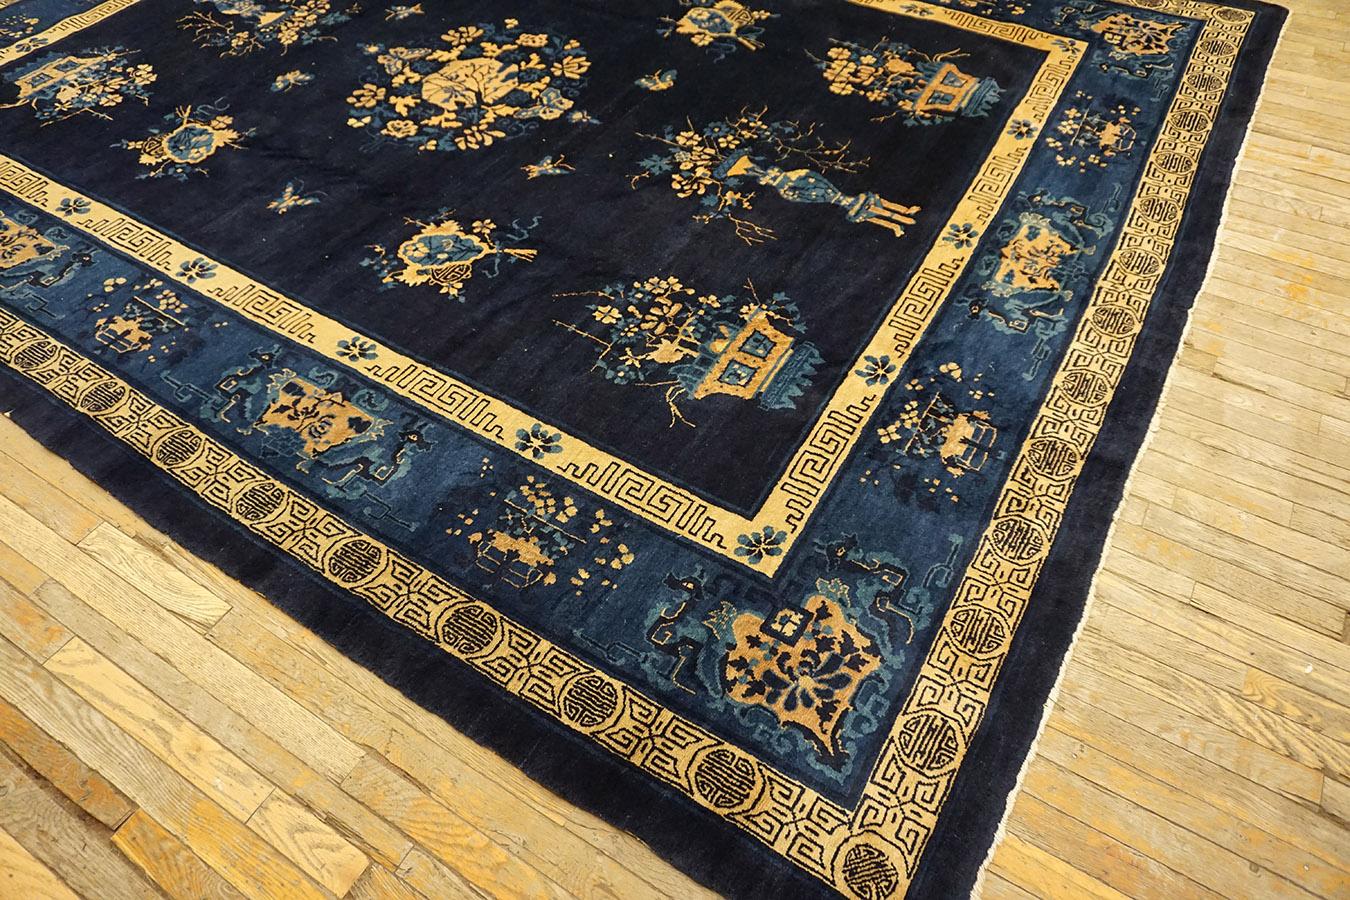 Late 19th Century Early 20th Century Chinese Perking Carpet ( 9' x 11'8'' - 275 x 355 ) For Sale